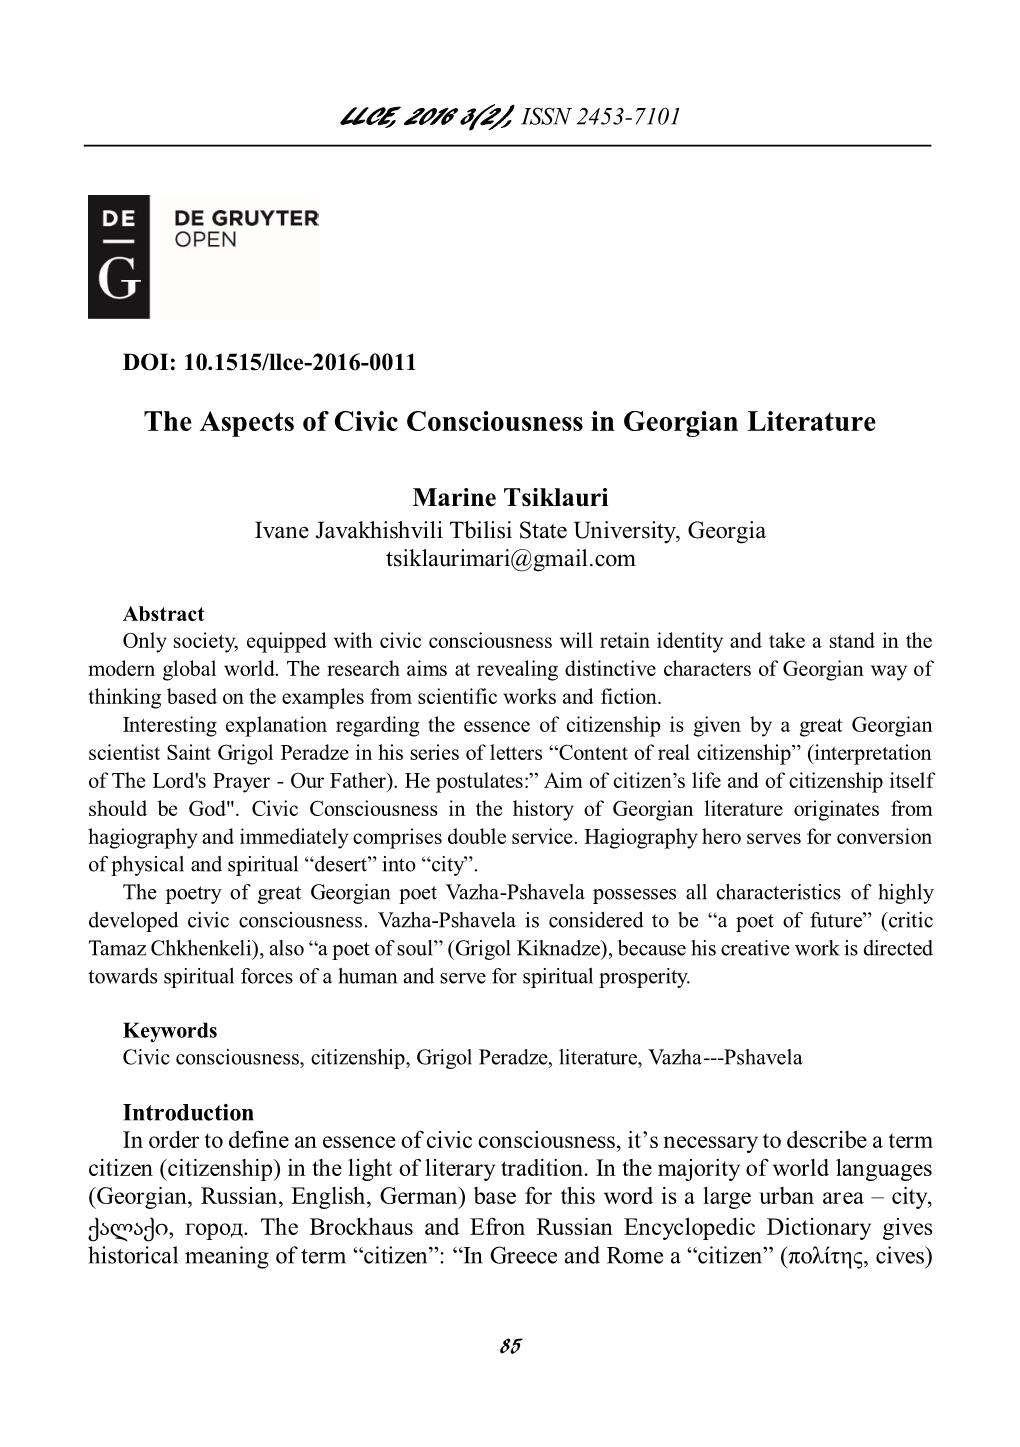 The Aspects of Civic Consciousness in Georgian Literature